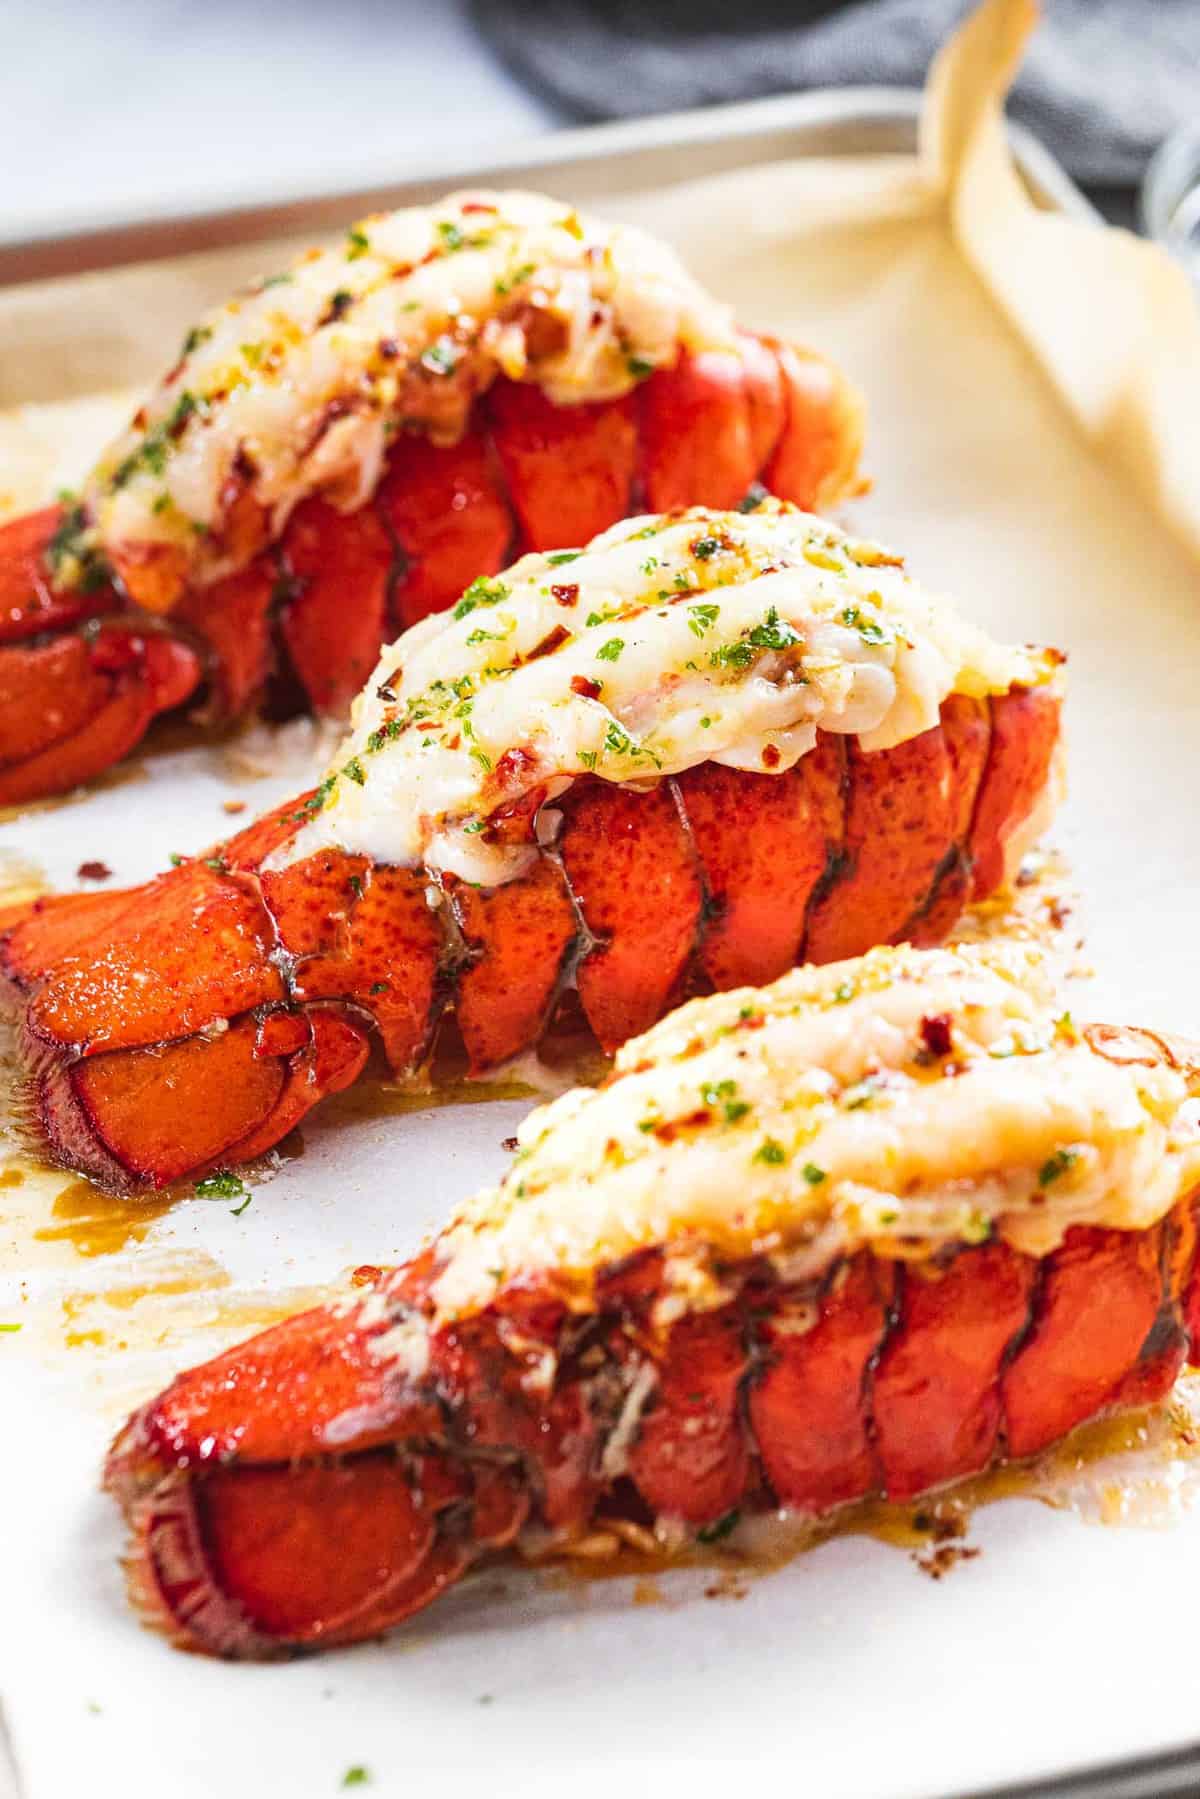 Broiled lobster tails with garlic butter on a baking tray.